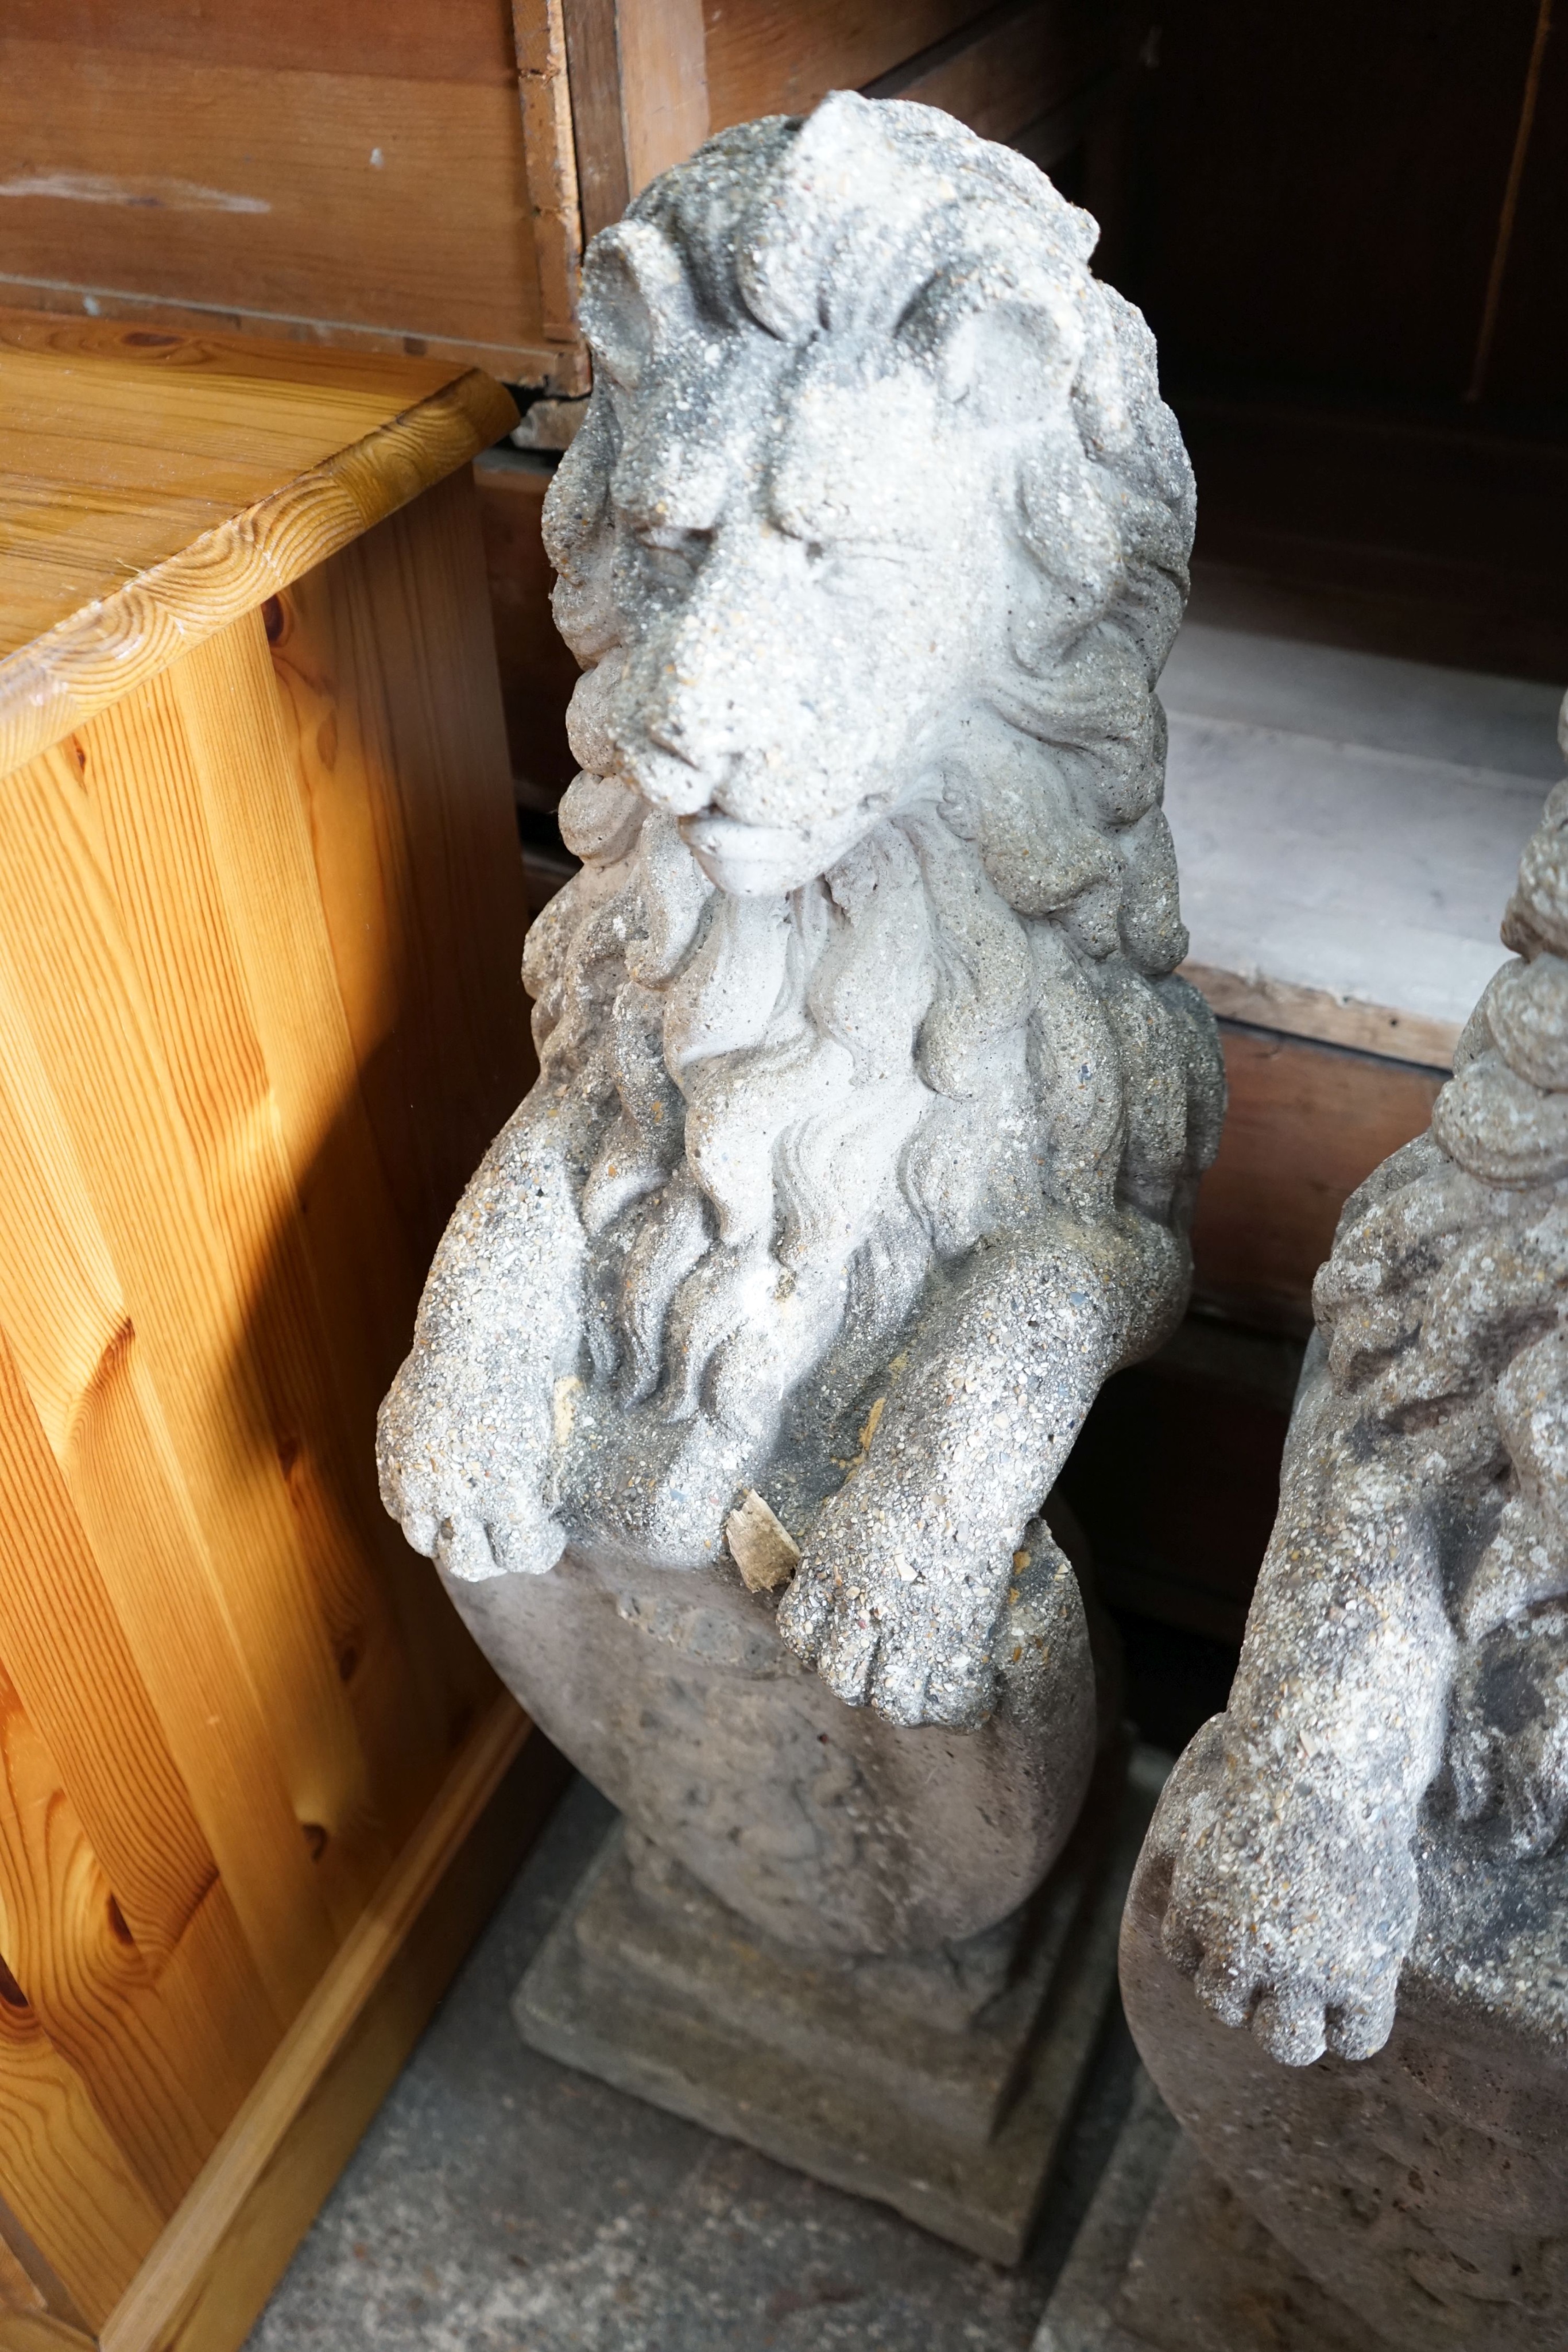 A pair of reconstituted stone heraldic lions, height 80cm